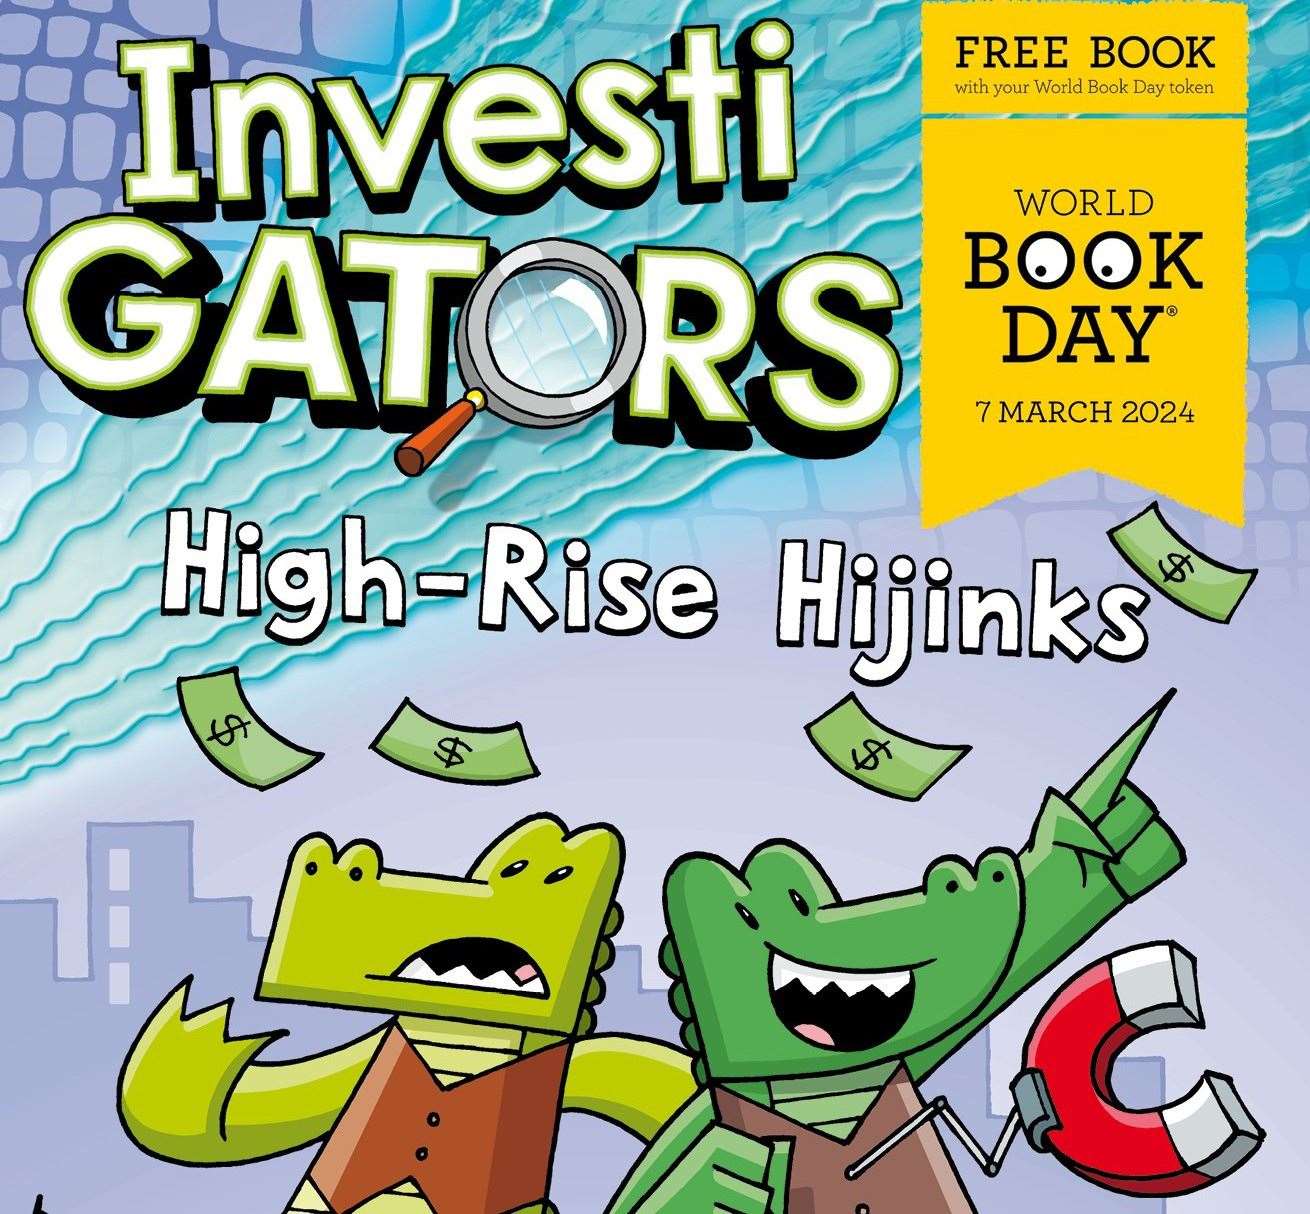 High-Rise Hijinks from the Investi Gators